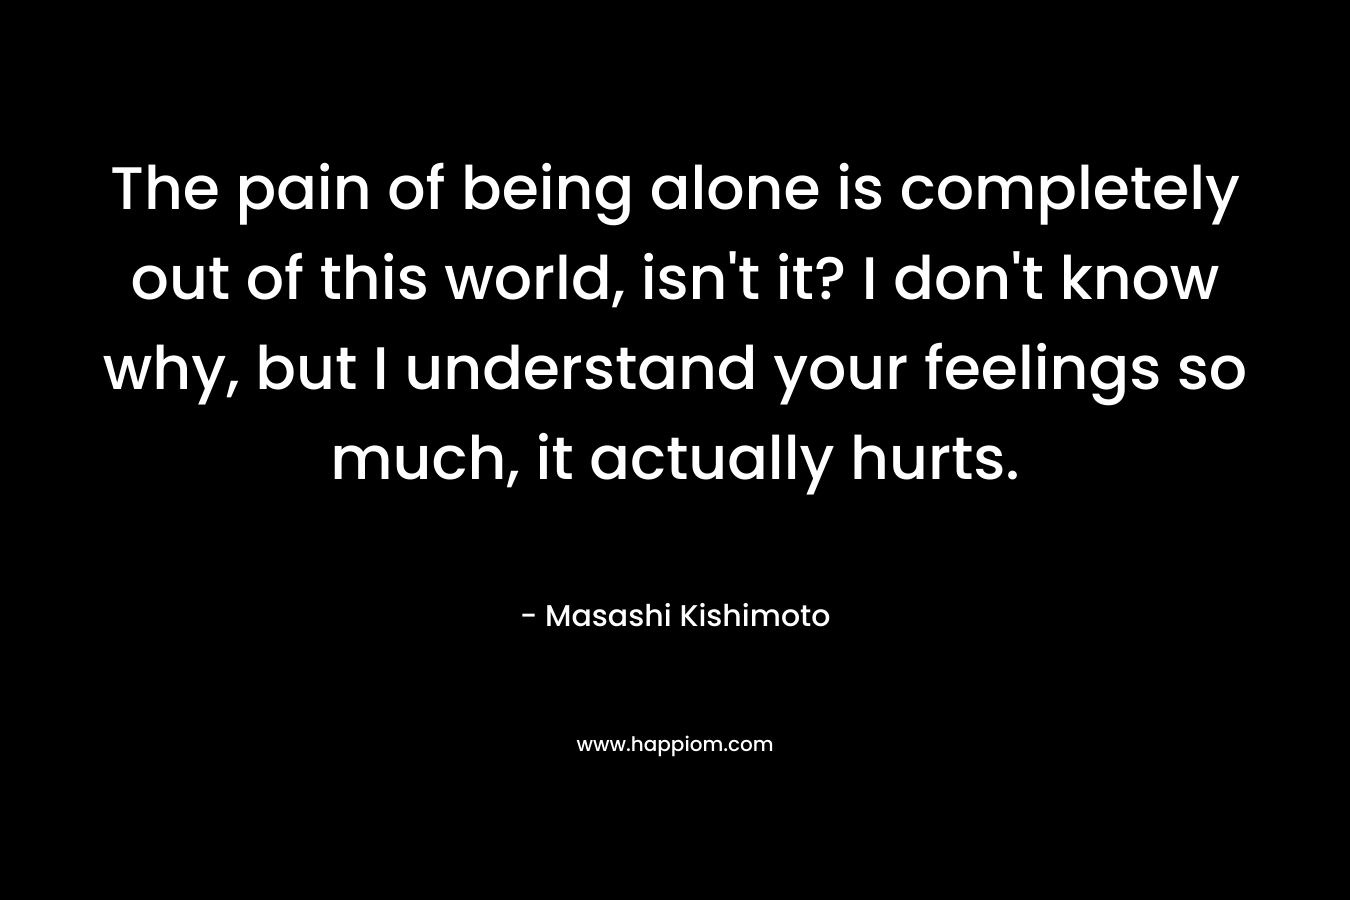 The pain of being alone is completely out of this world, isn't it? I don't know why, but I understand your feelings so much, it actually hurts. 